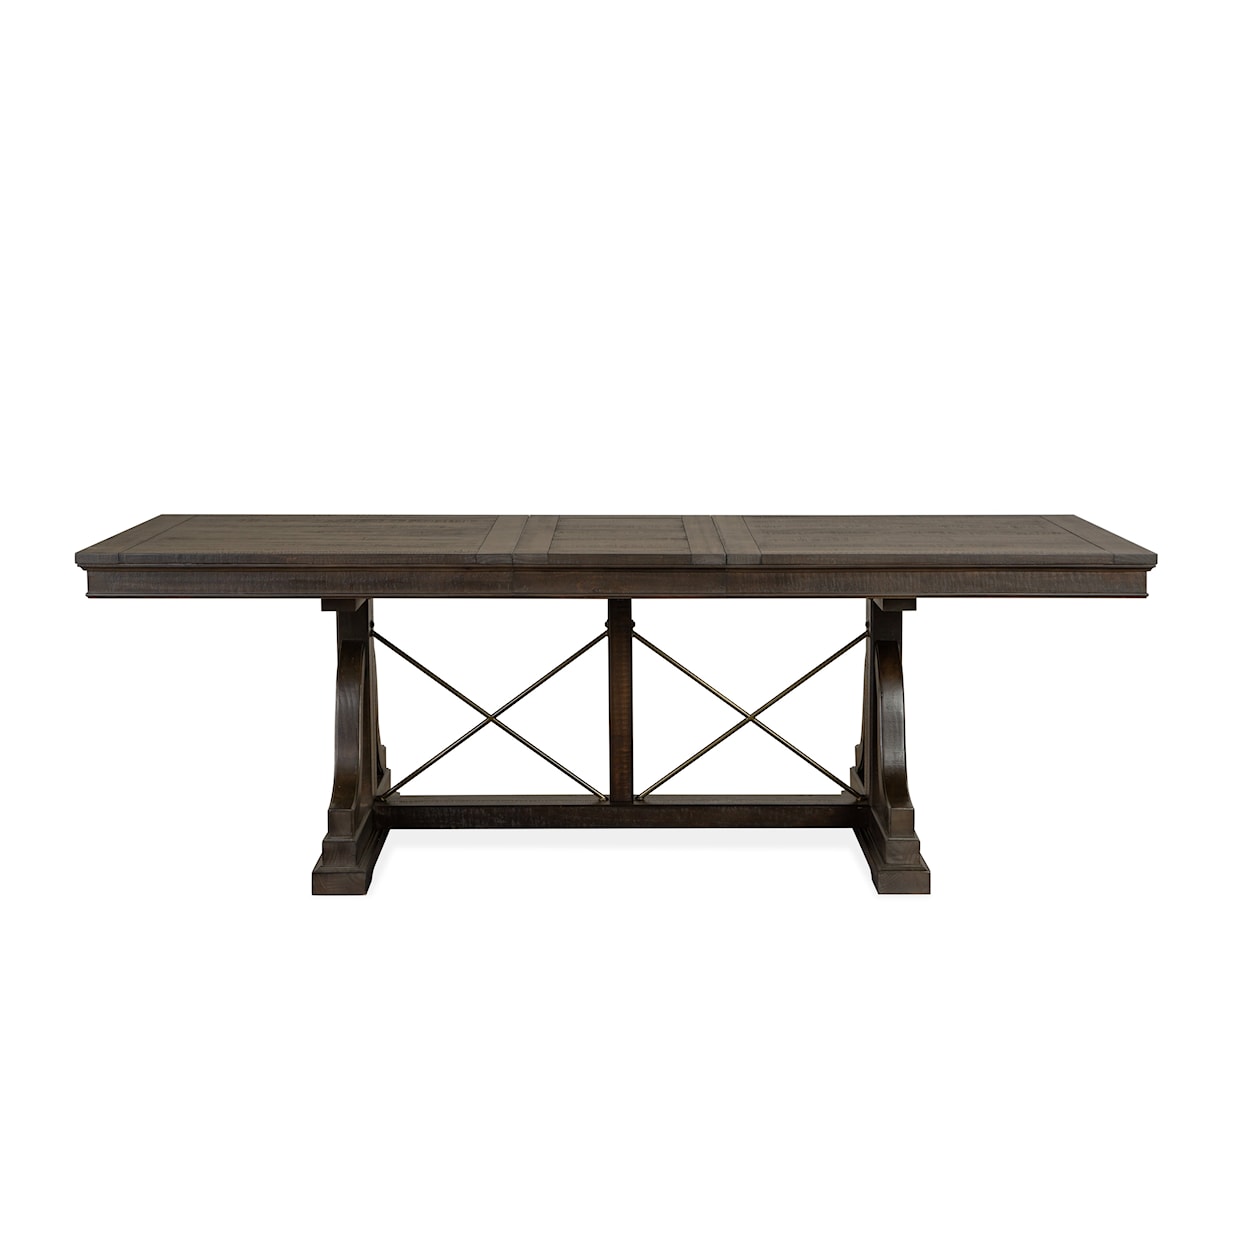 Belfort Select Wells Dining Trestle Table